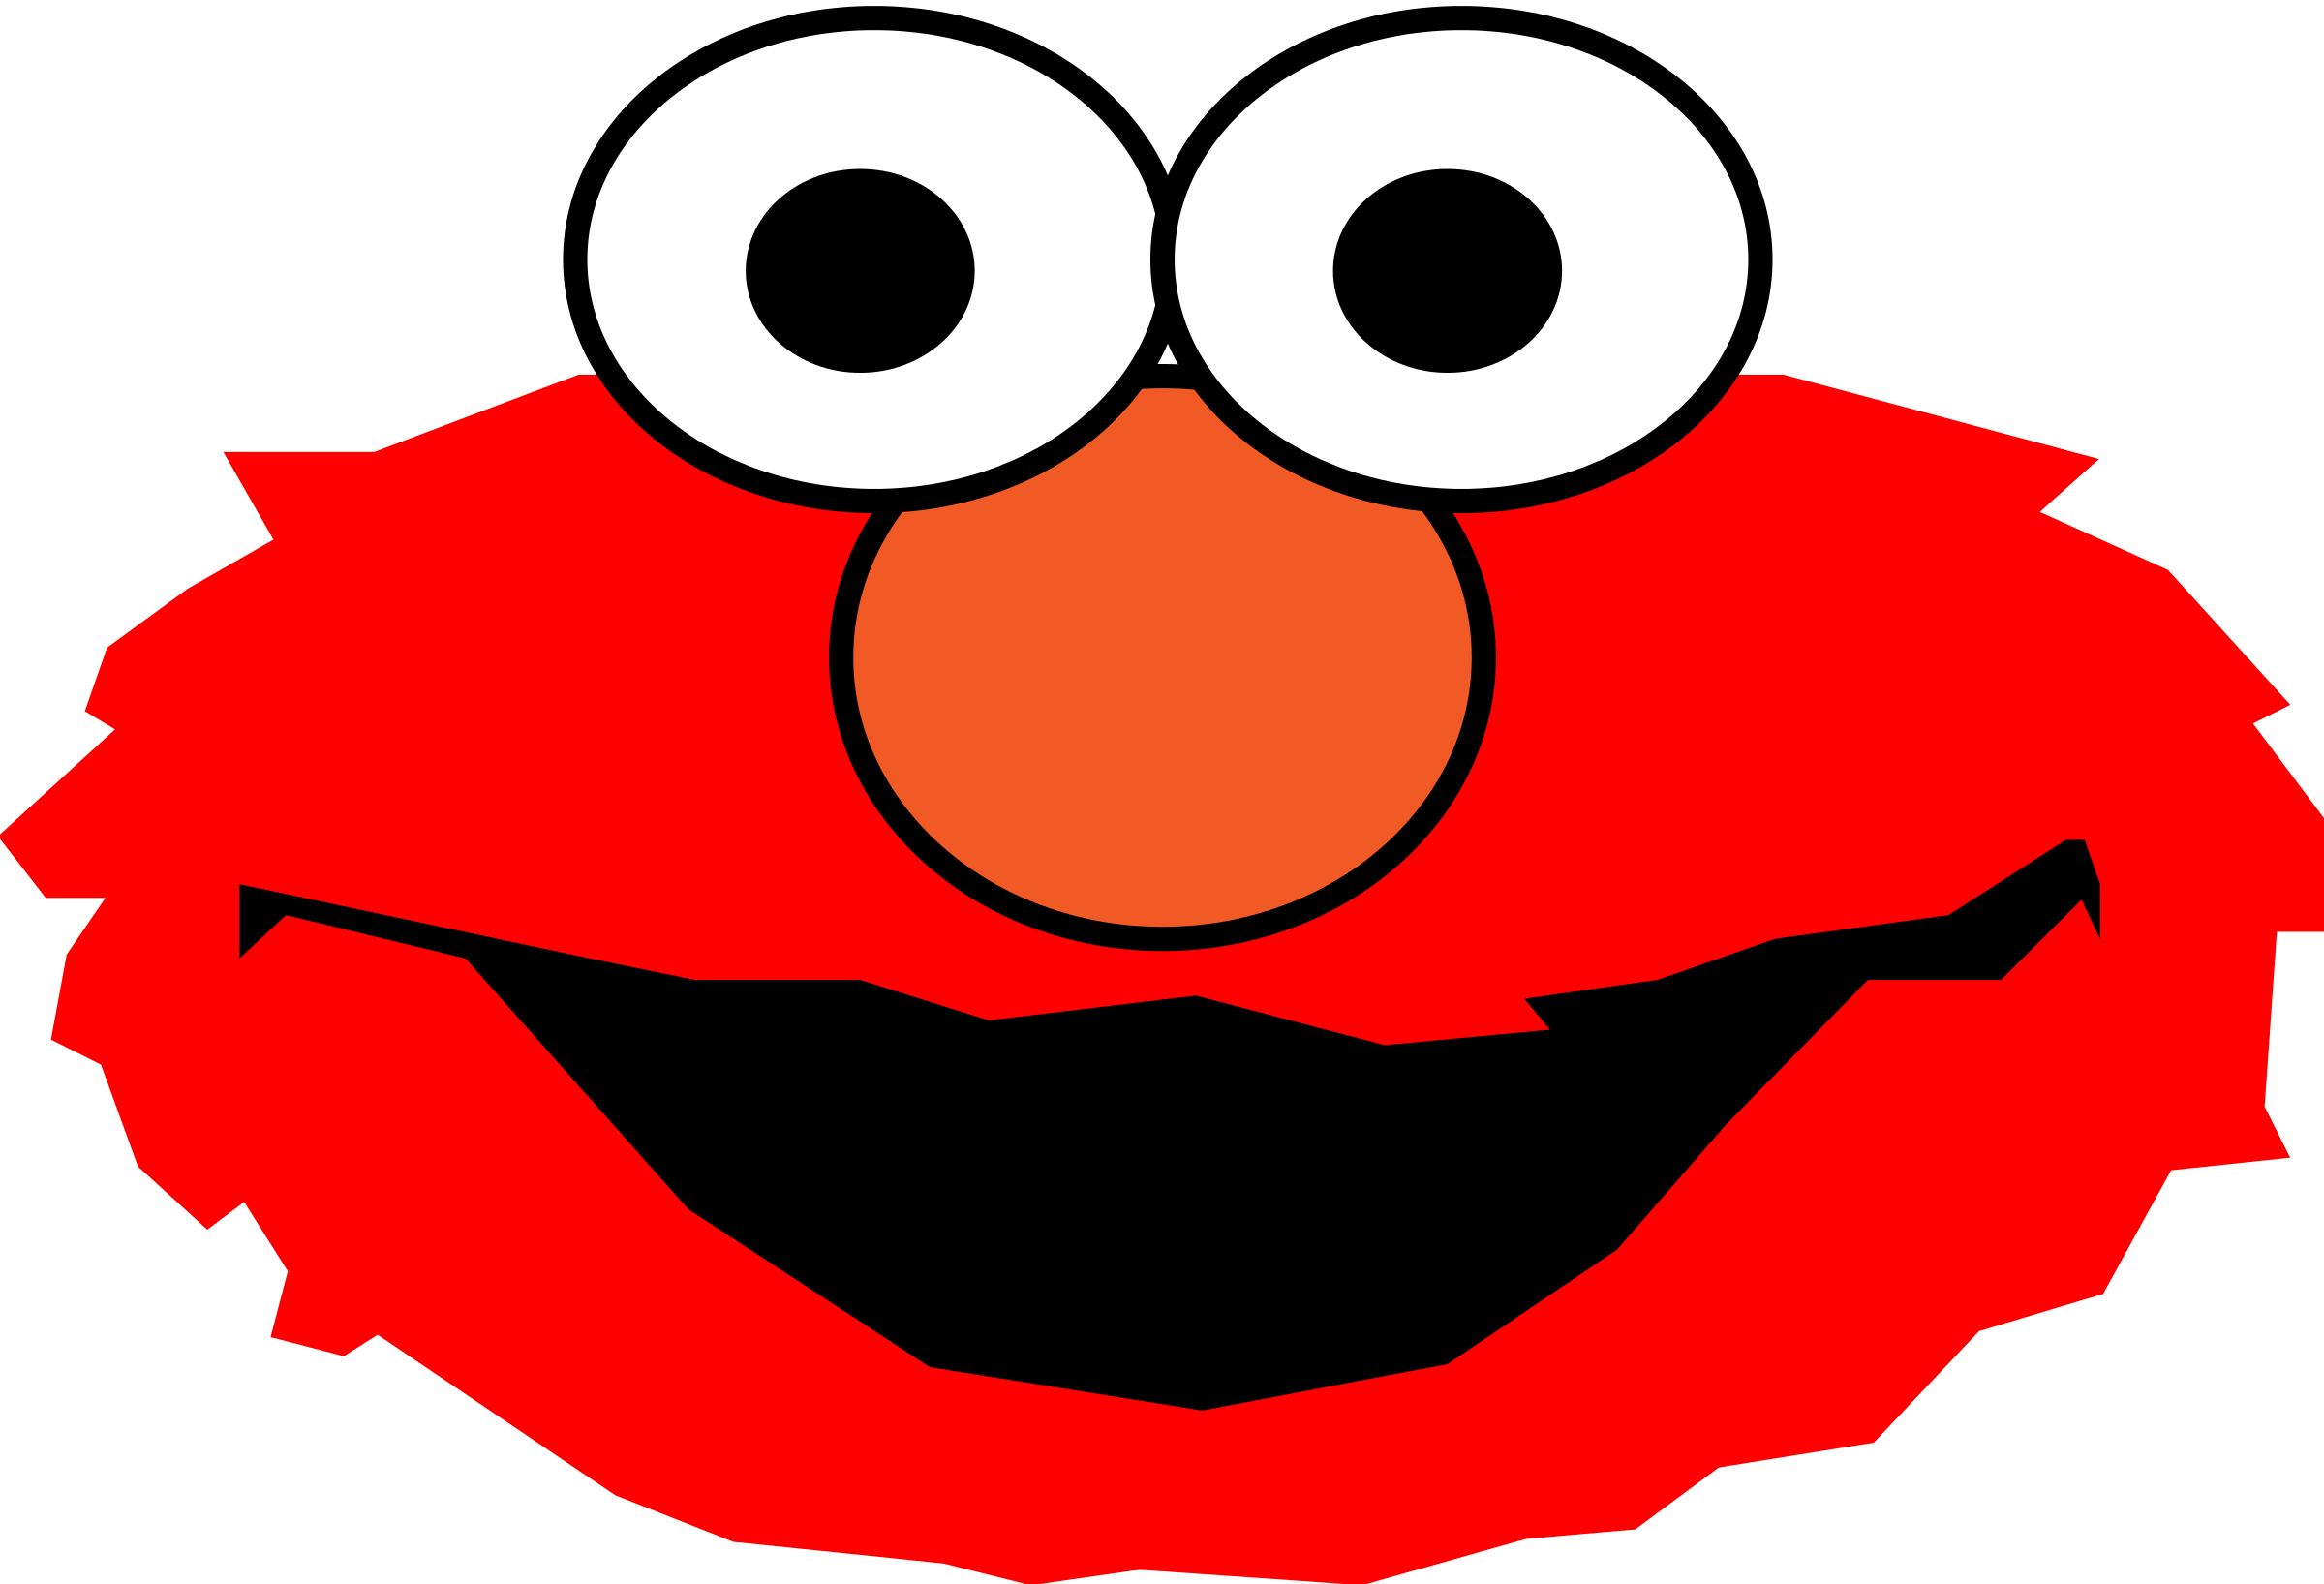 Elmo 2 clipart free images